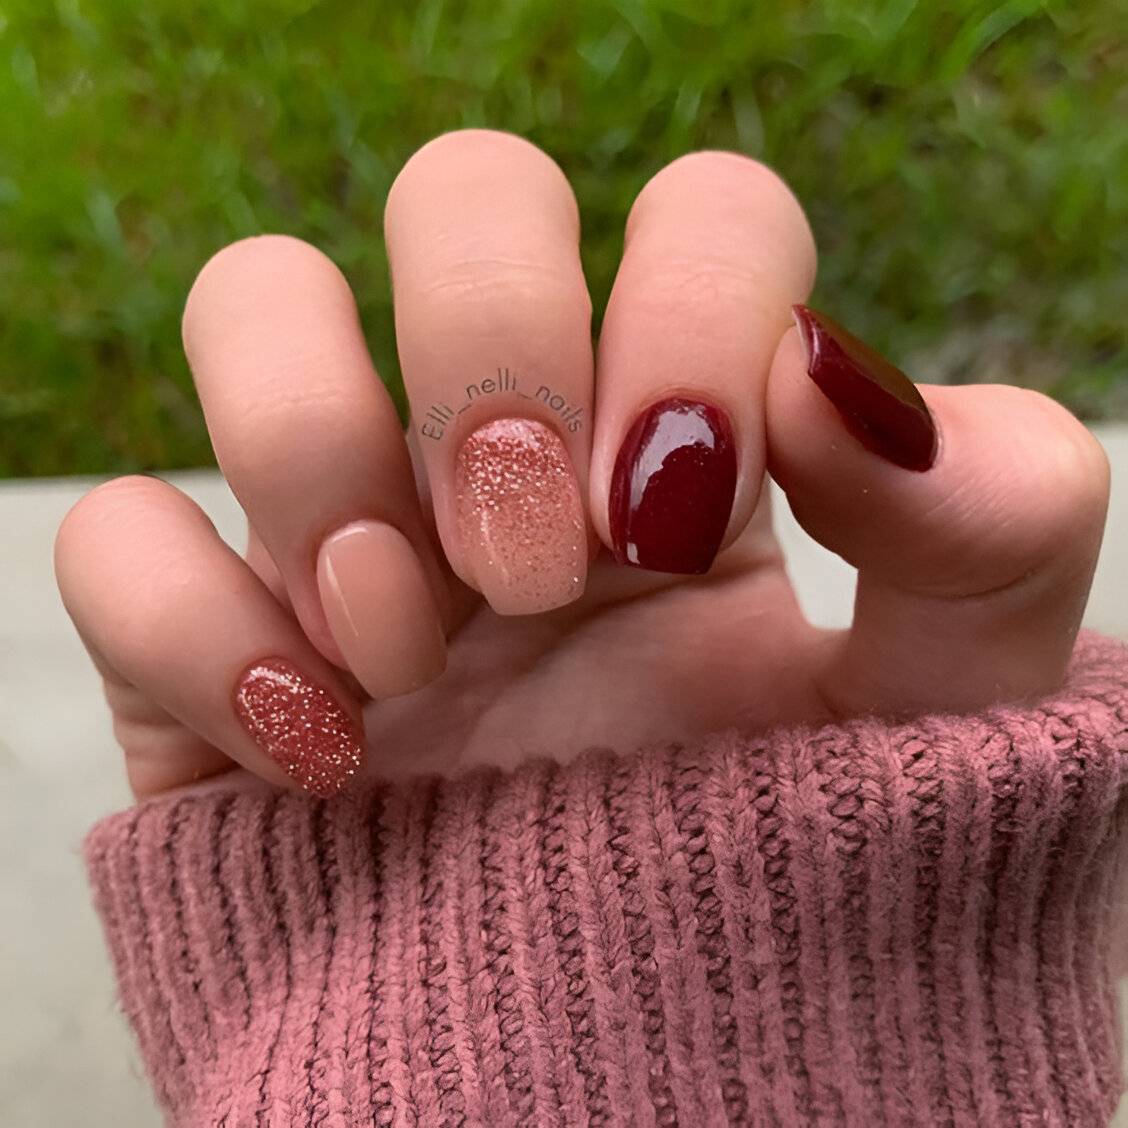 30 Autumn Nail Designs Too Chic To Resist - 231